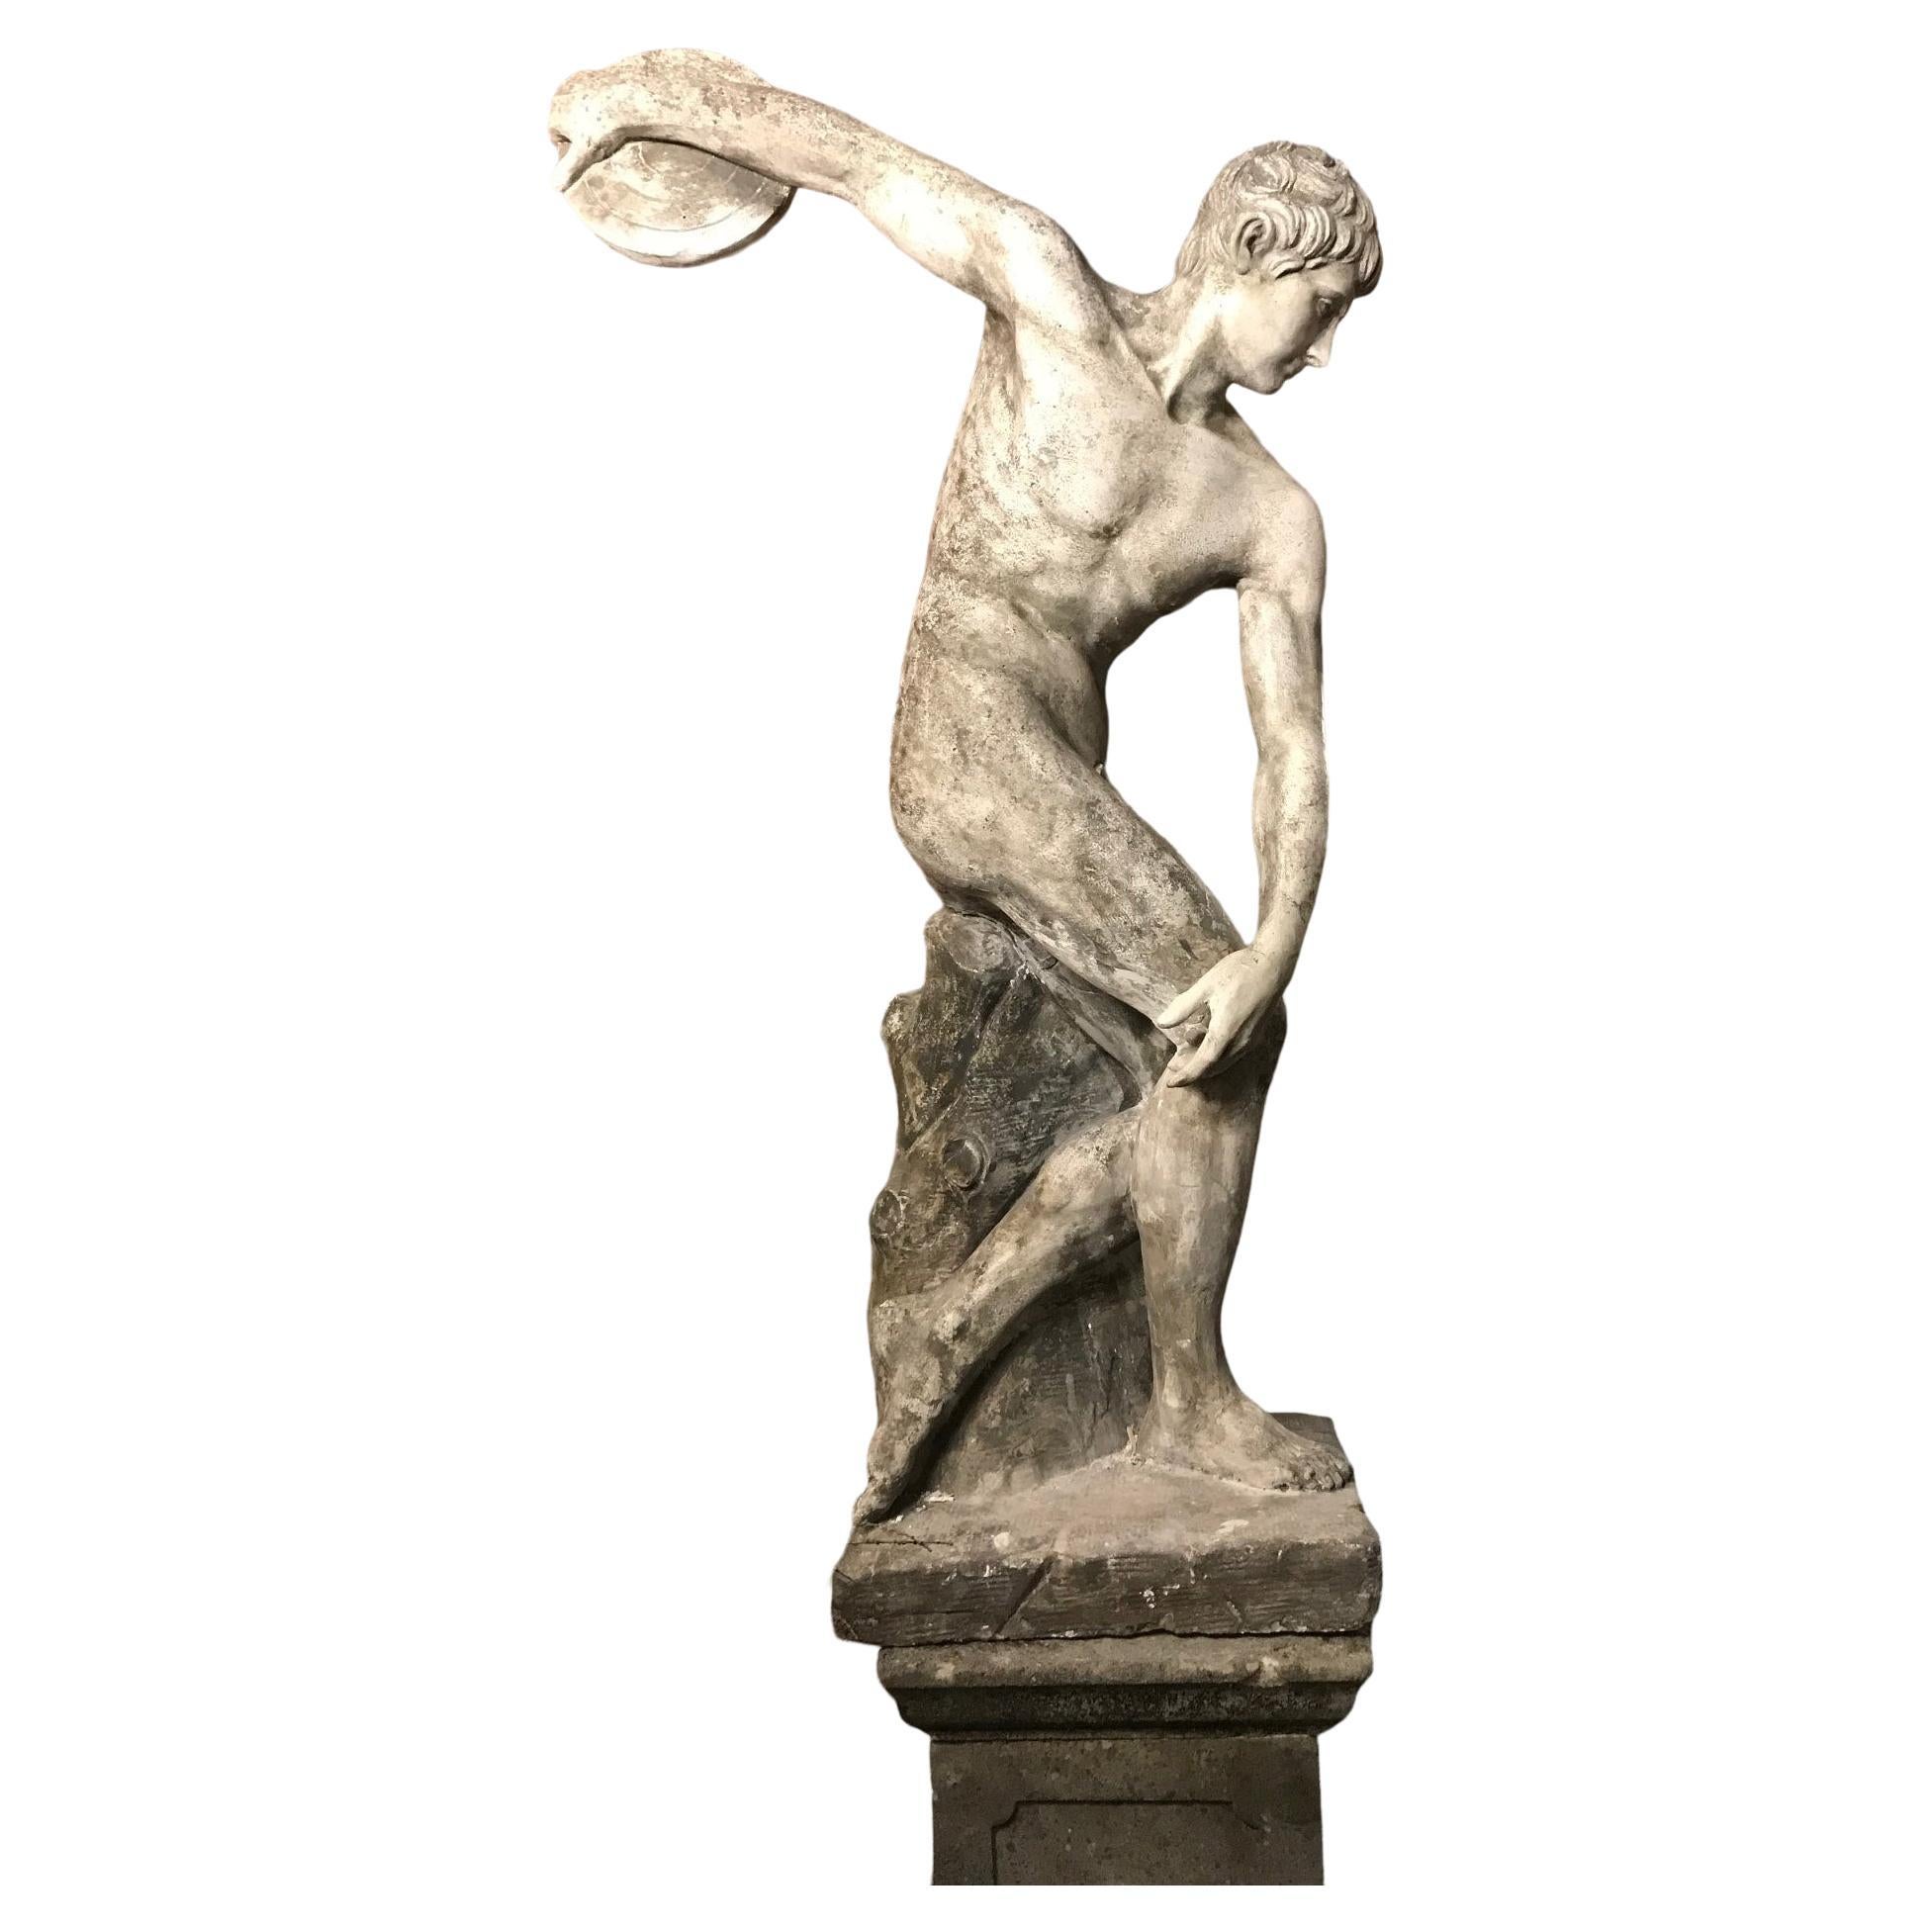 After the Antique, a Large 20th C Plaster Figure of a Discus Thrower For Sale